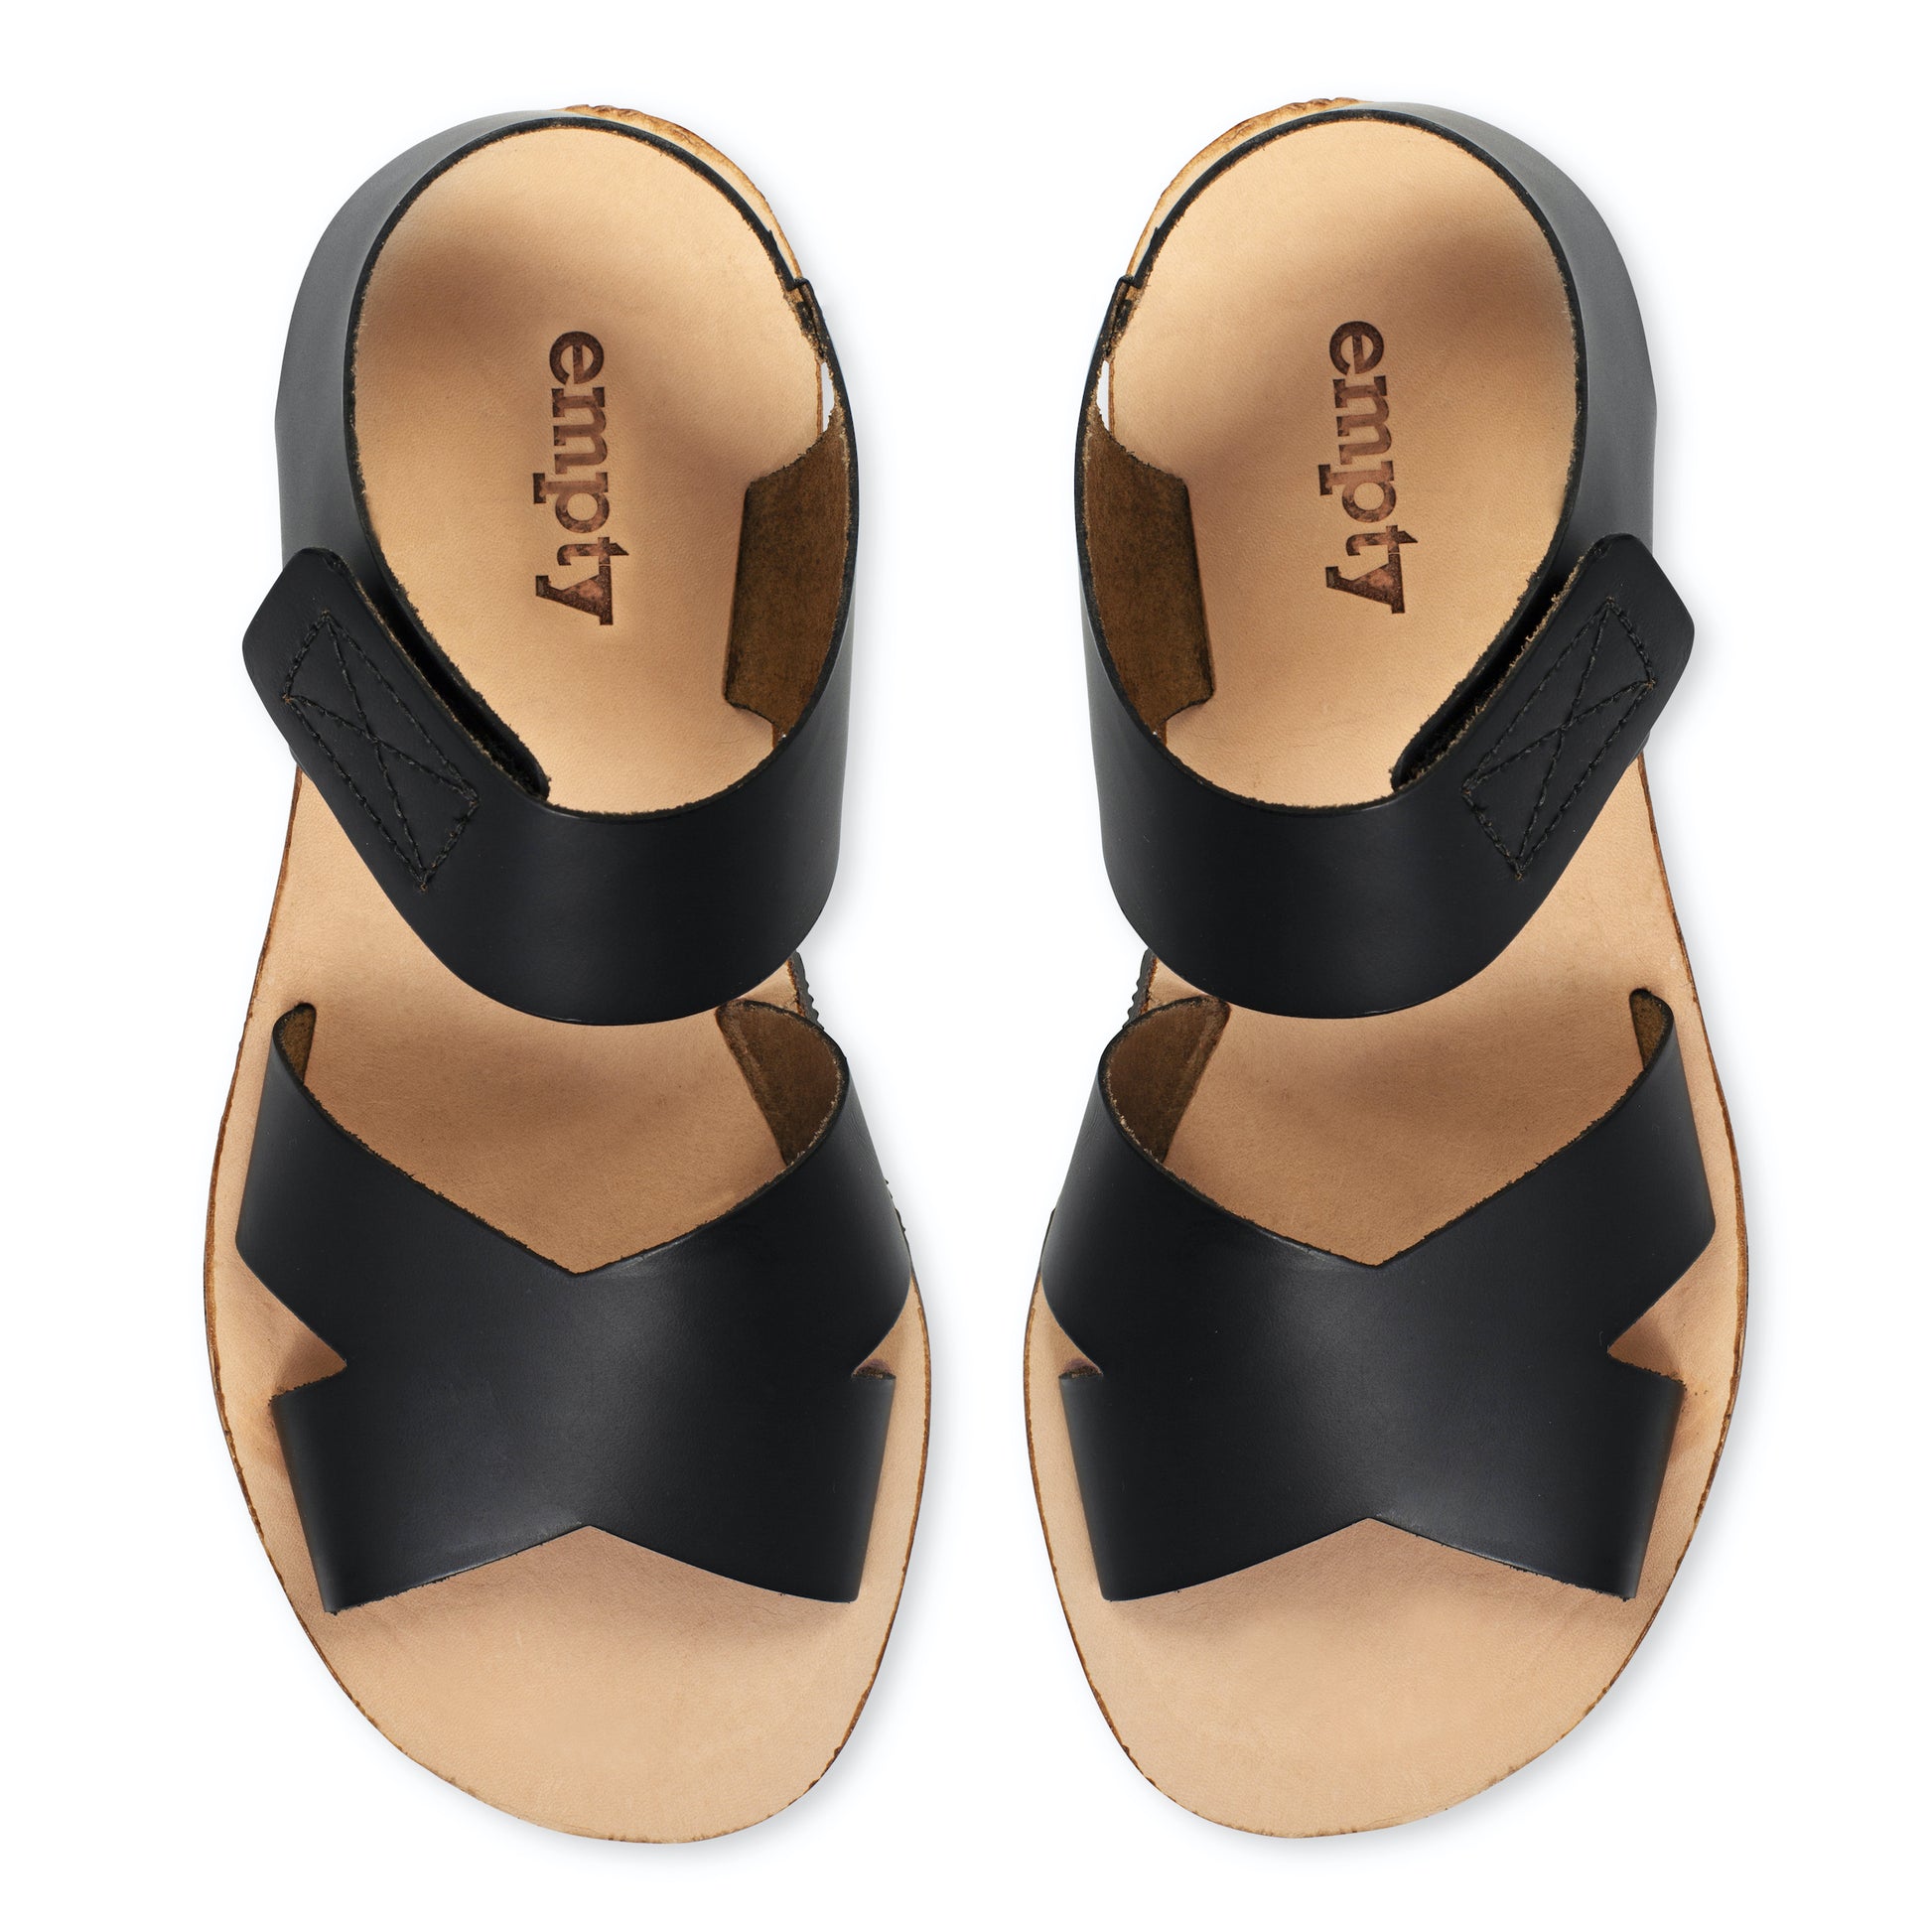 real leather sandals women's